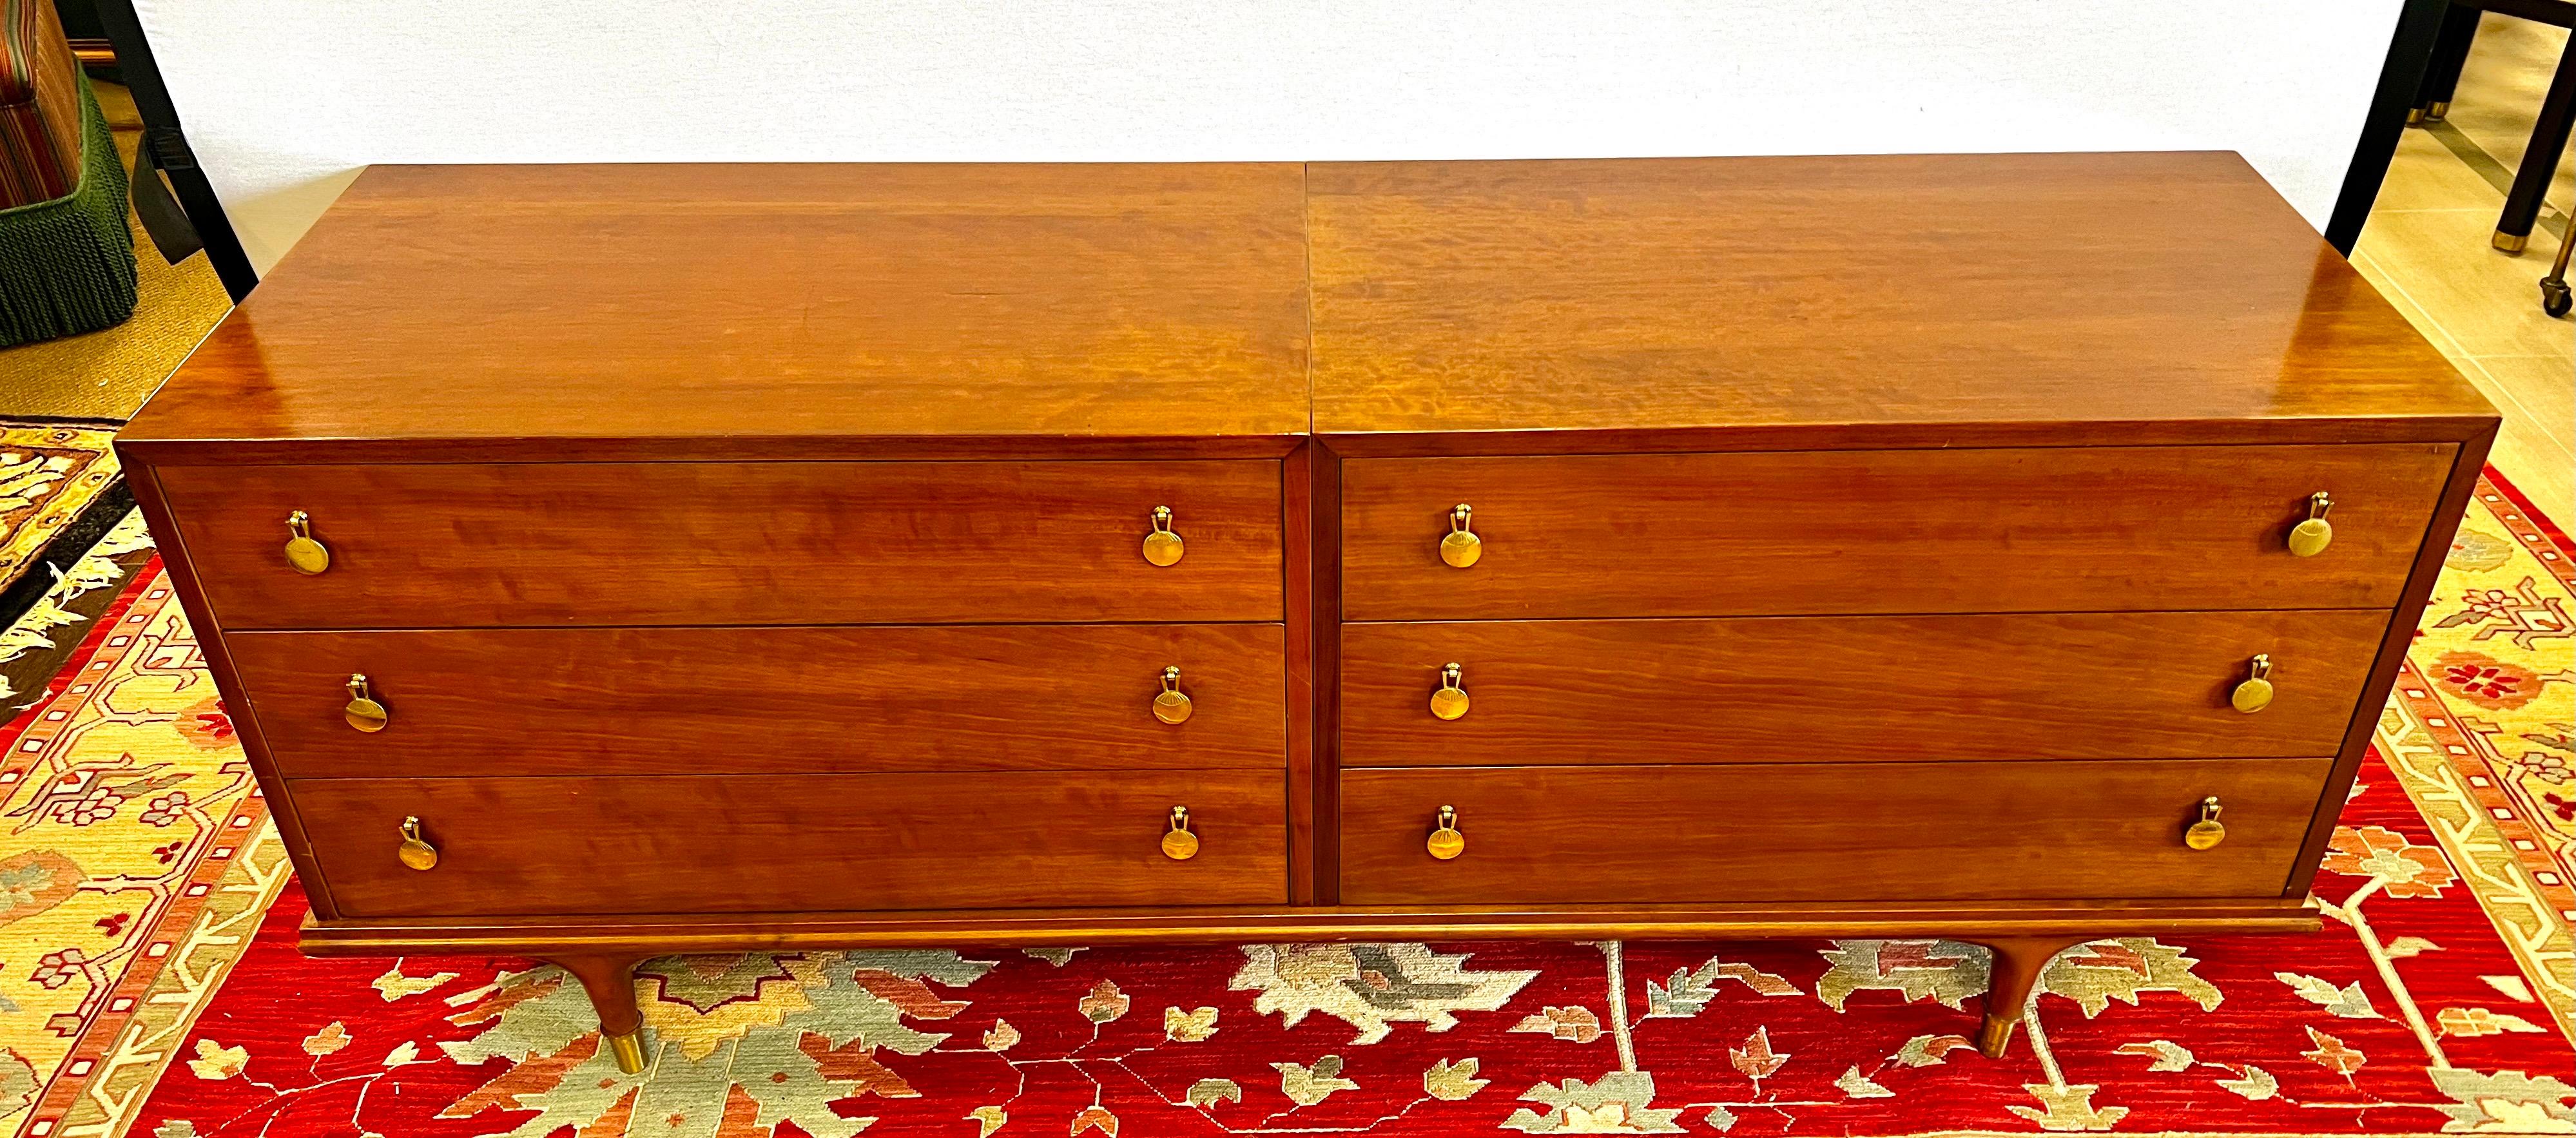 Sleek and elegant mid century walnut dresser with 6 spacious drawers. Features stylized brass pulls and brass capped feet. By John Stuart.